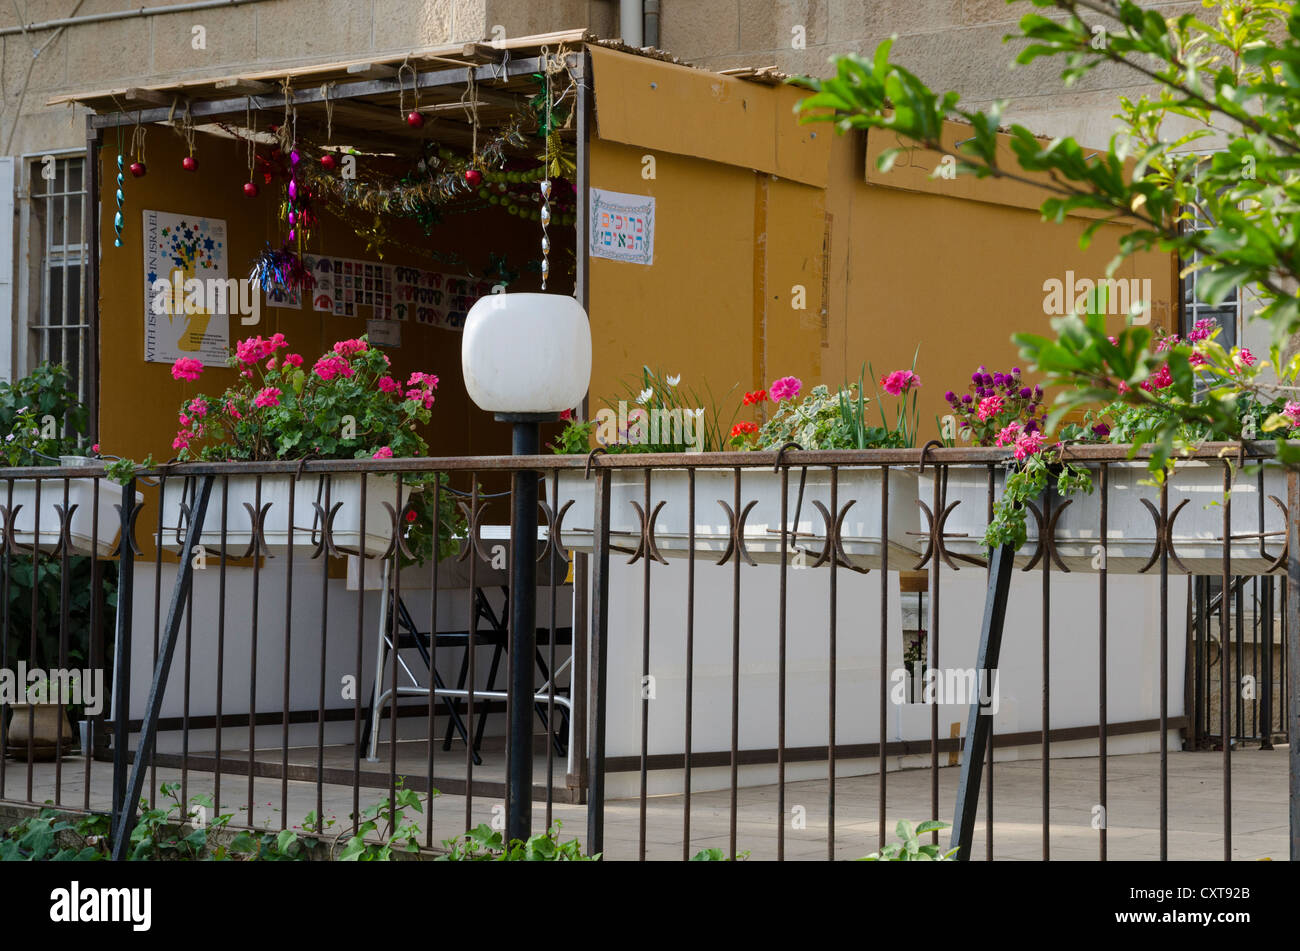 Cardboard sukkah booth for sukkot Jewish festival with flowers in foreground. Jerusalem. Israel. Stock Photo